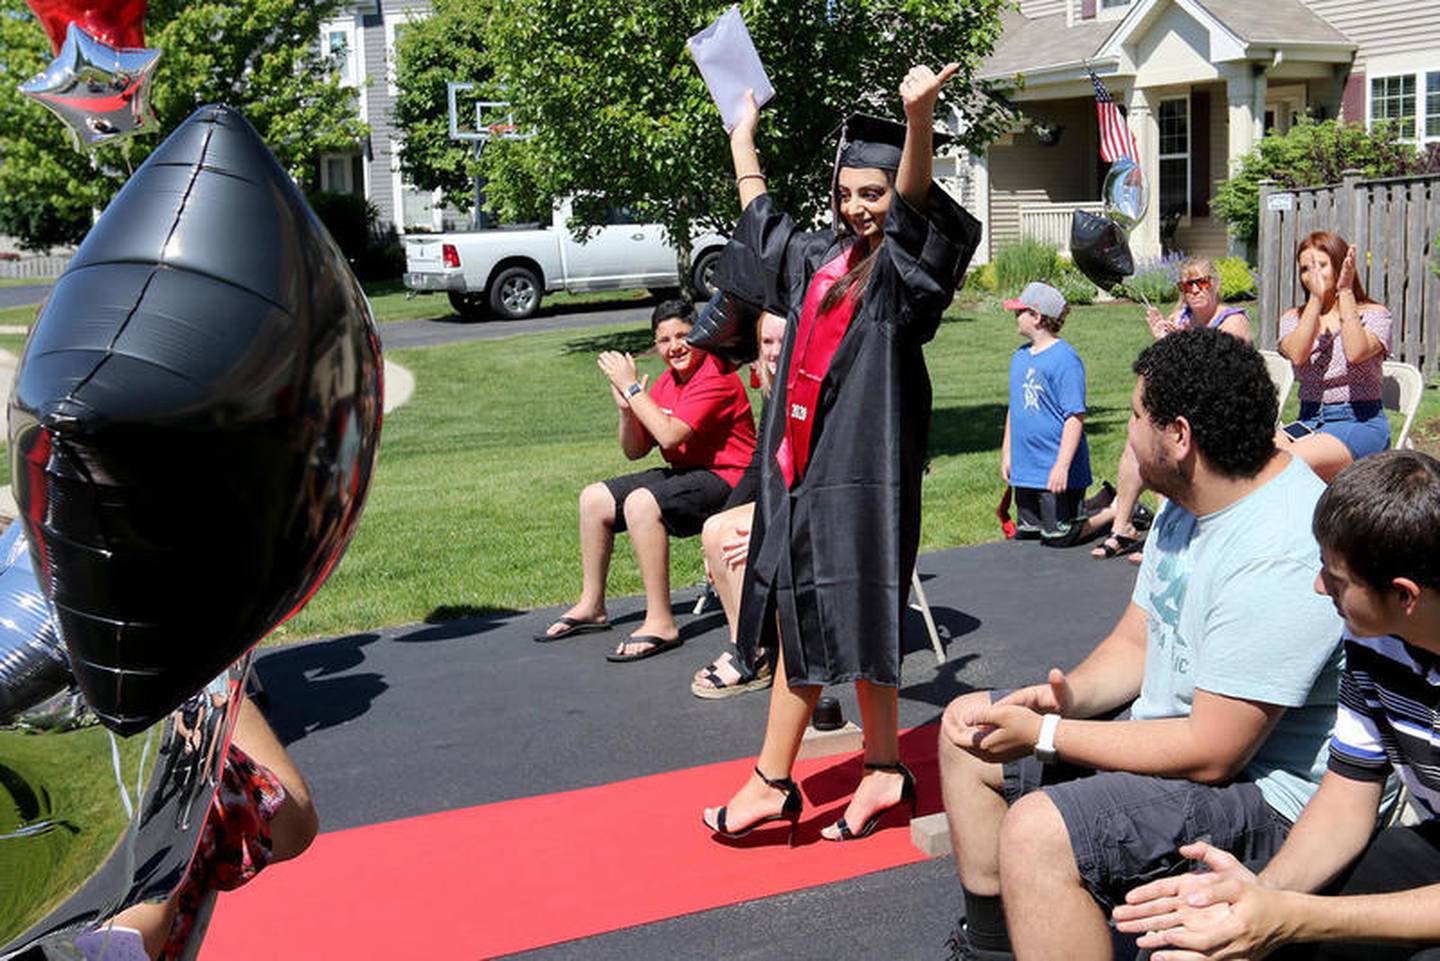 Julianna Ghanayem, 18, throws her arms up in celebration of receiving her Huntley High School diploma on Monday in Huntley. Principal Marcus Belin and other faculty members drove to graduating seniors' houses to personally deliver diplomas with a socially distant ceremony with "Pomp and Circumstance" bellowing from the bus.